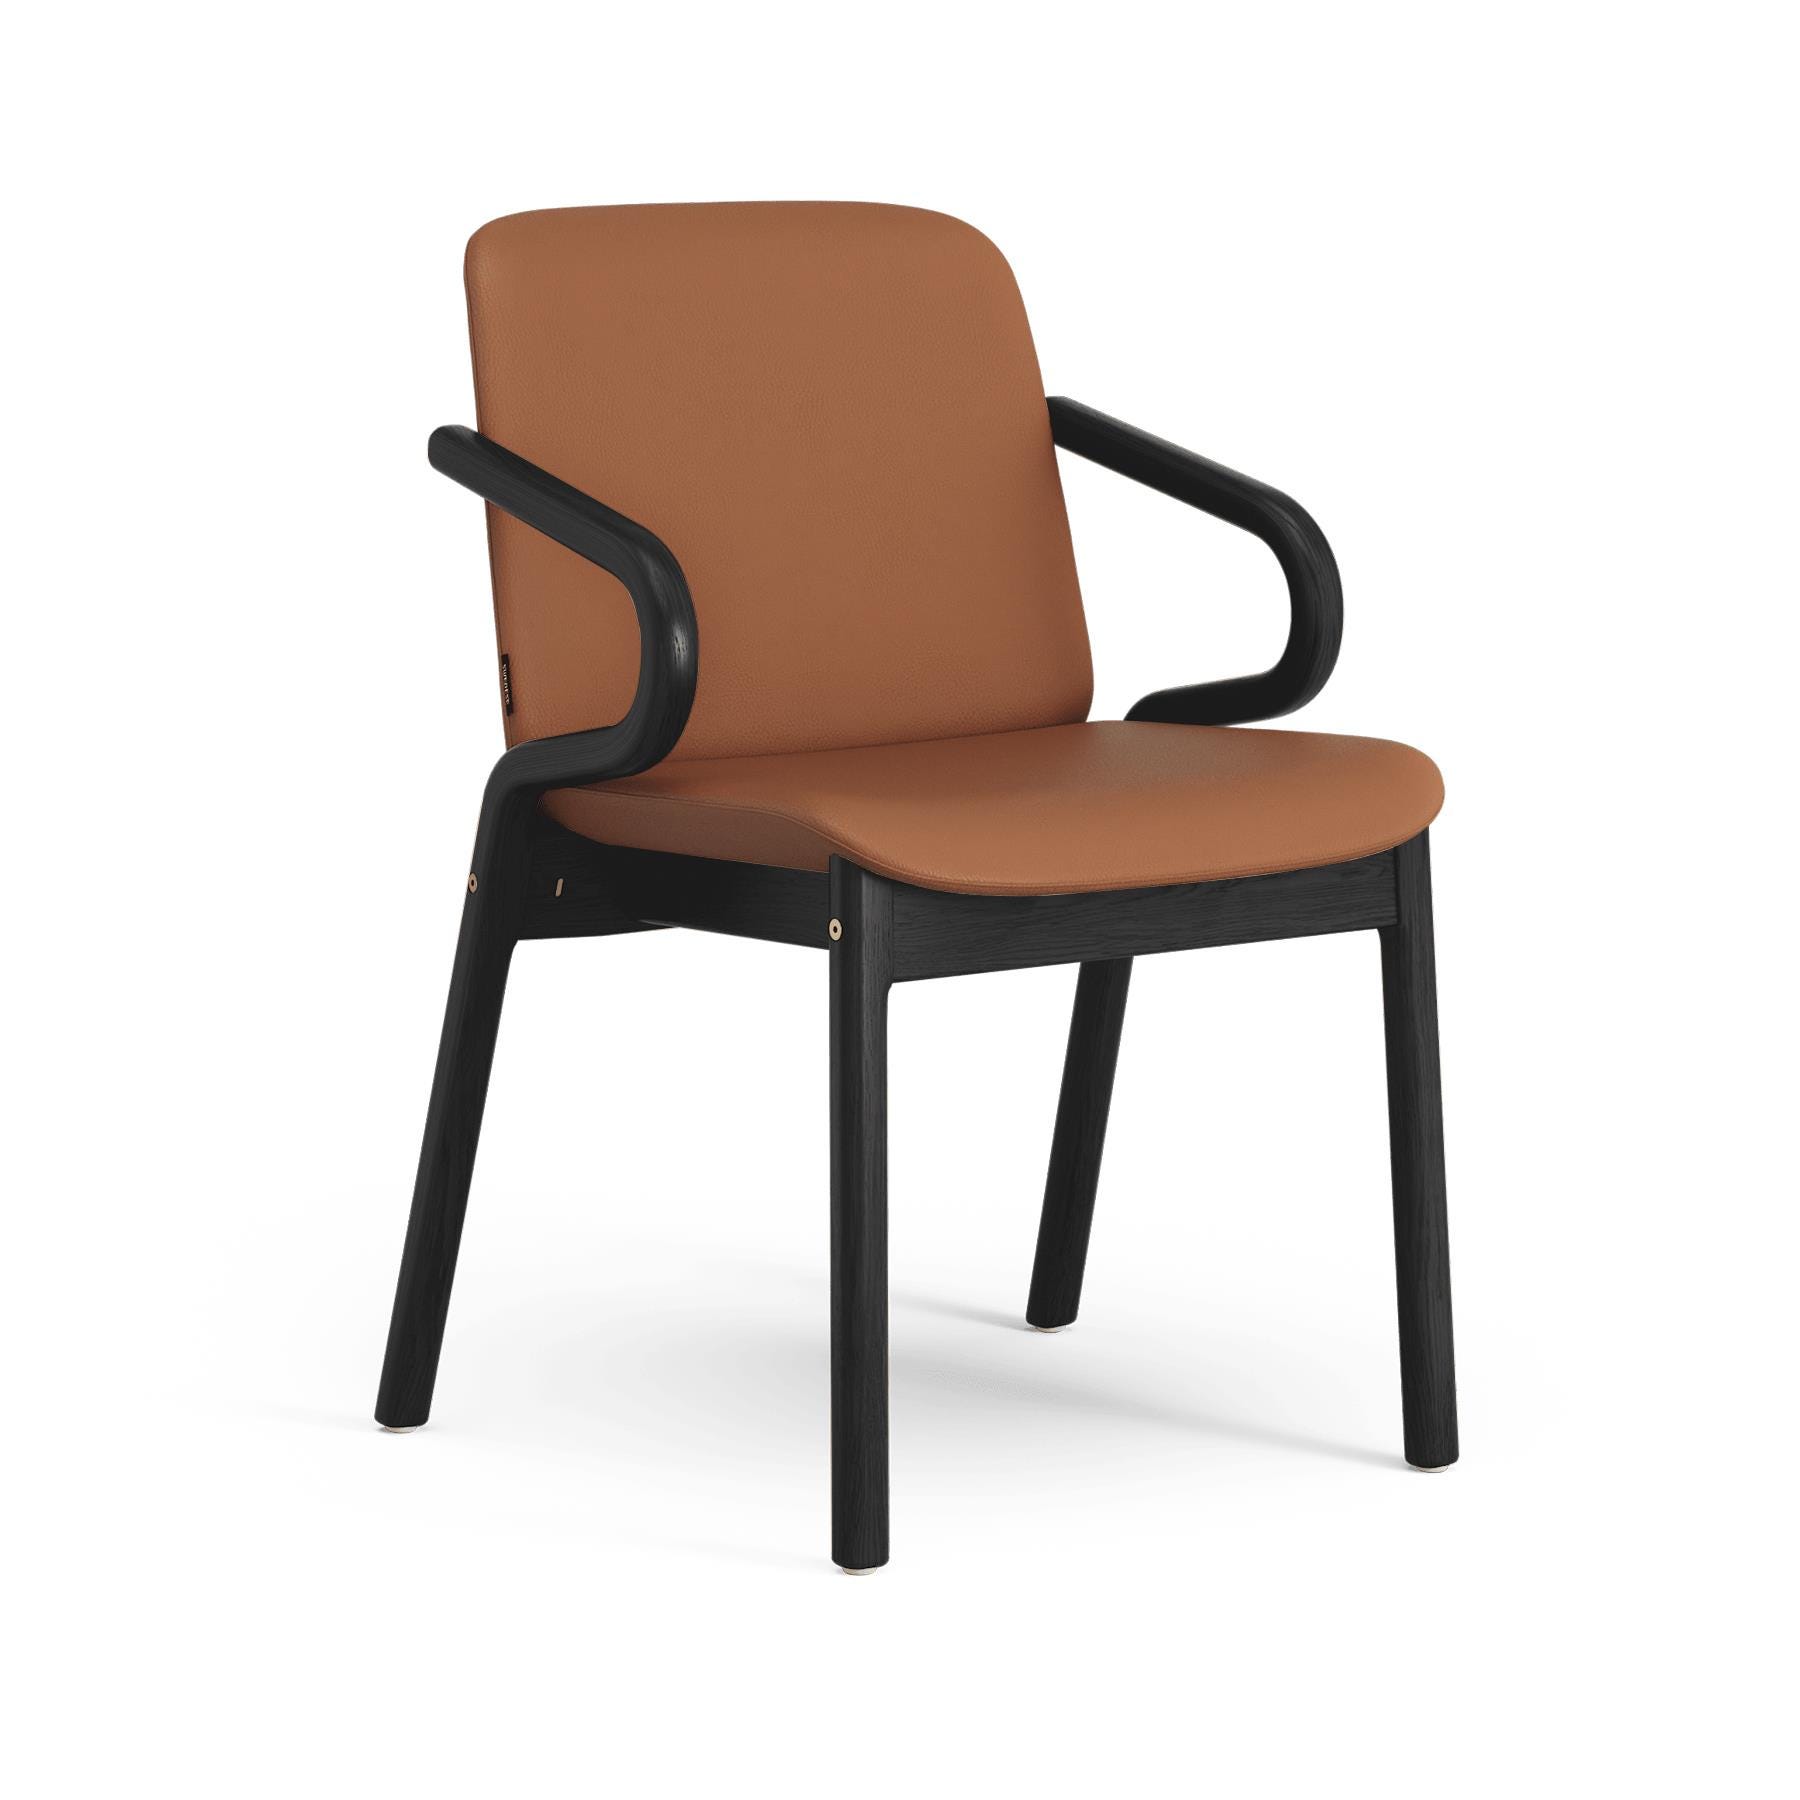 Swedese Amstelle Armchair Black Ash Nordic Cognac Leather Brown Designer Furniture From Holloways Of Ludlow